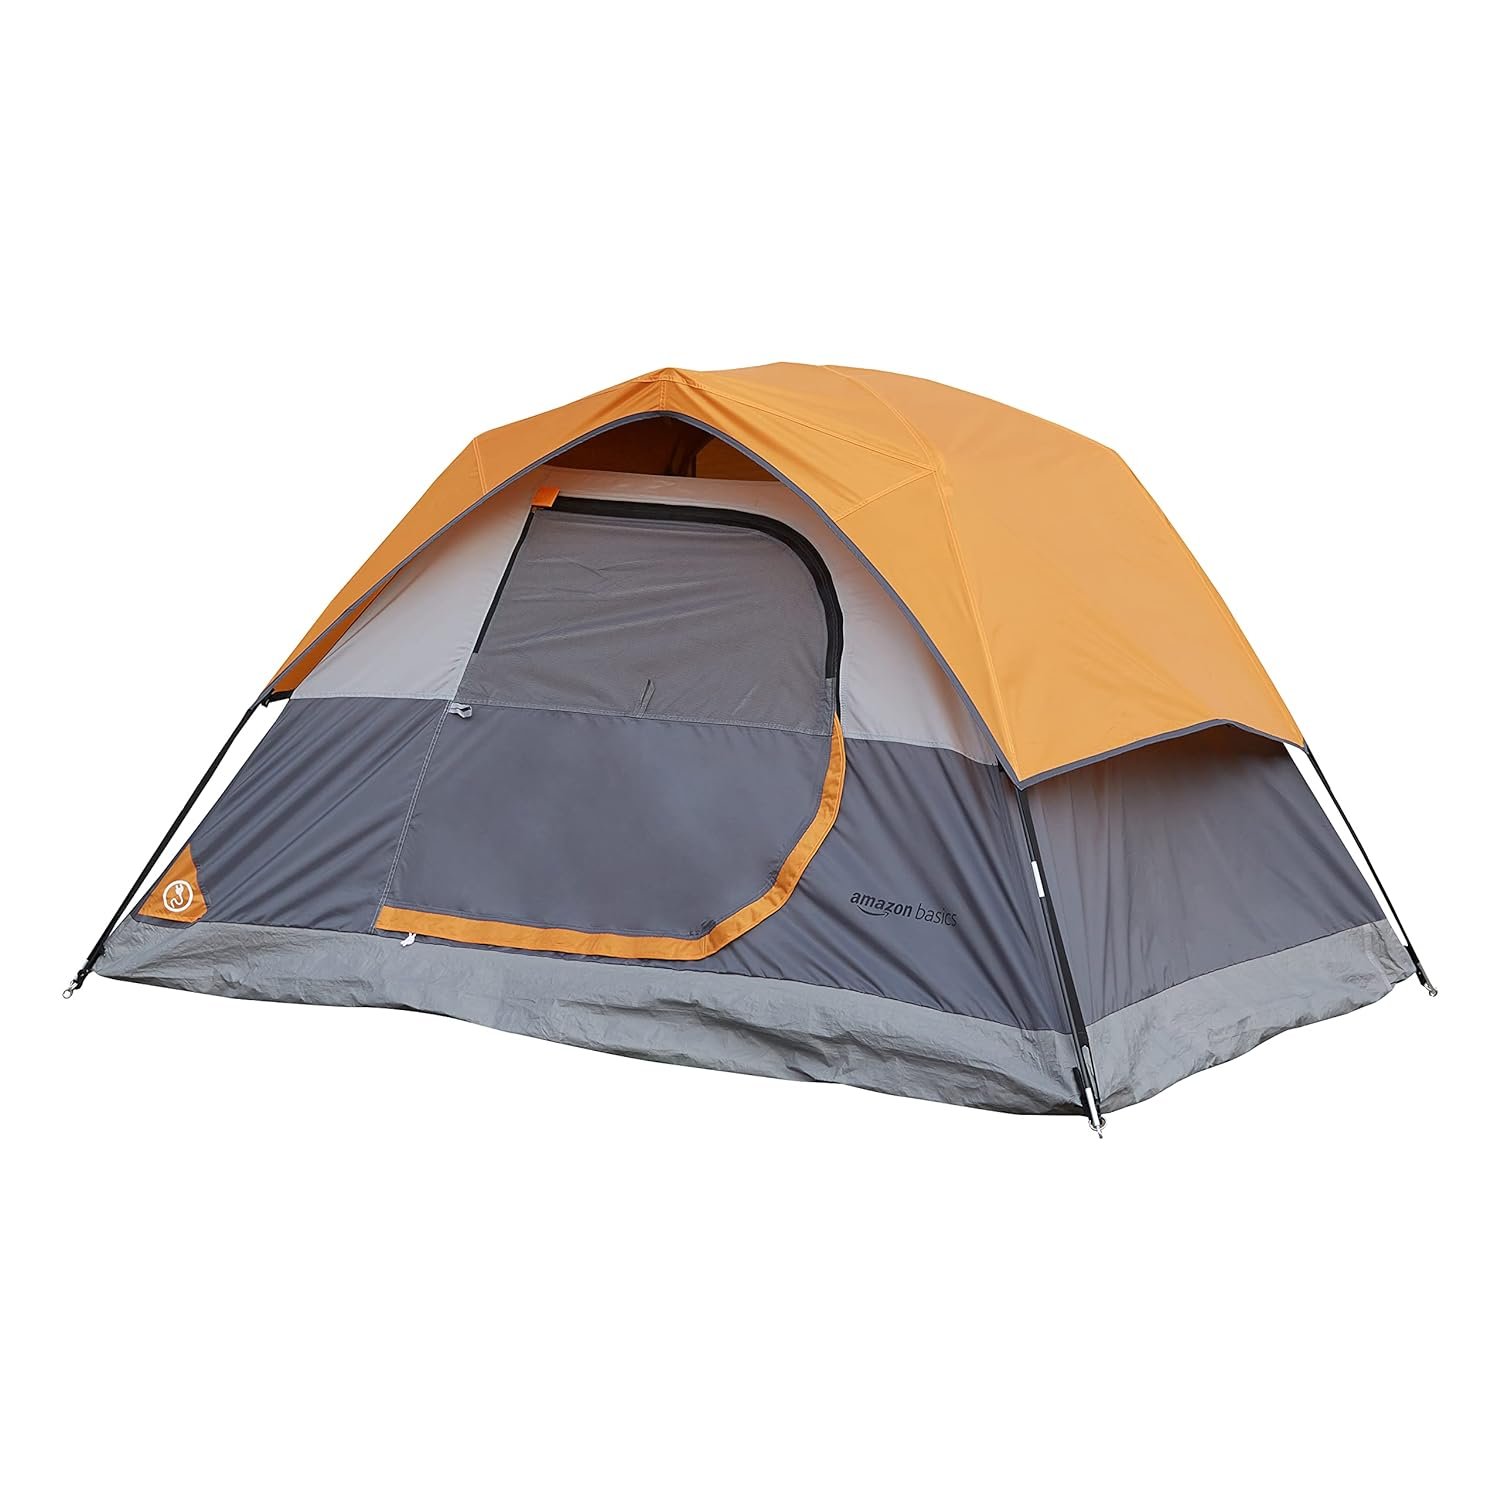 Amazon Basics Polyester Tent For Camping